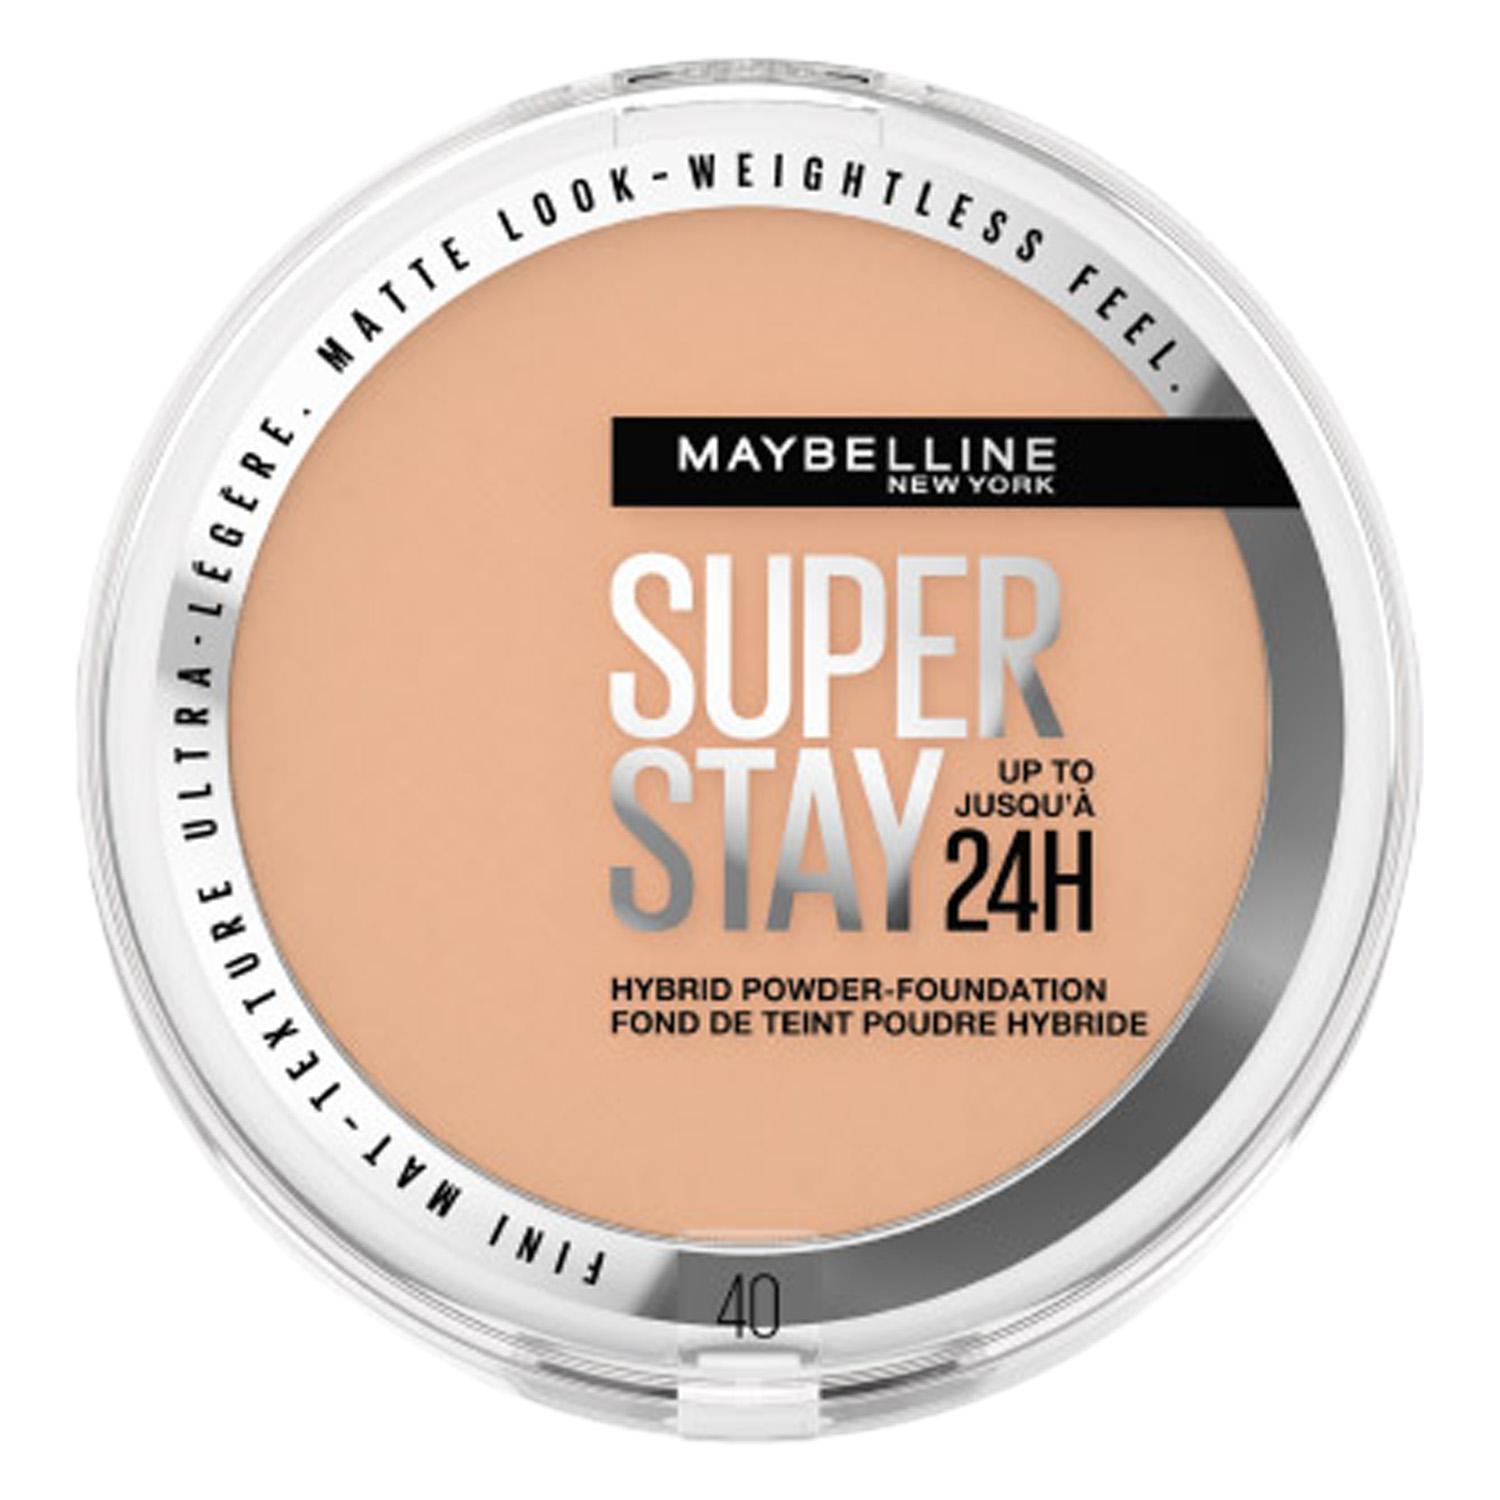 Maybelline NY Teint - Super Stay Hybrides Puder Make-Up Nr. 40 Fawn